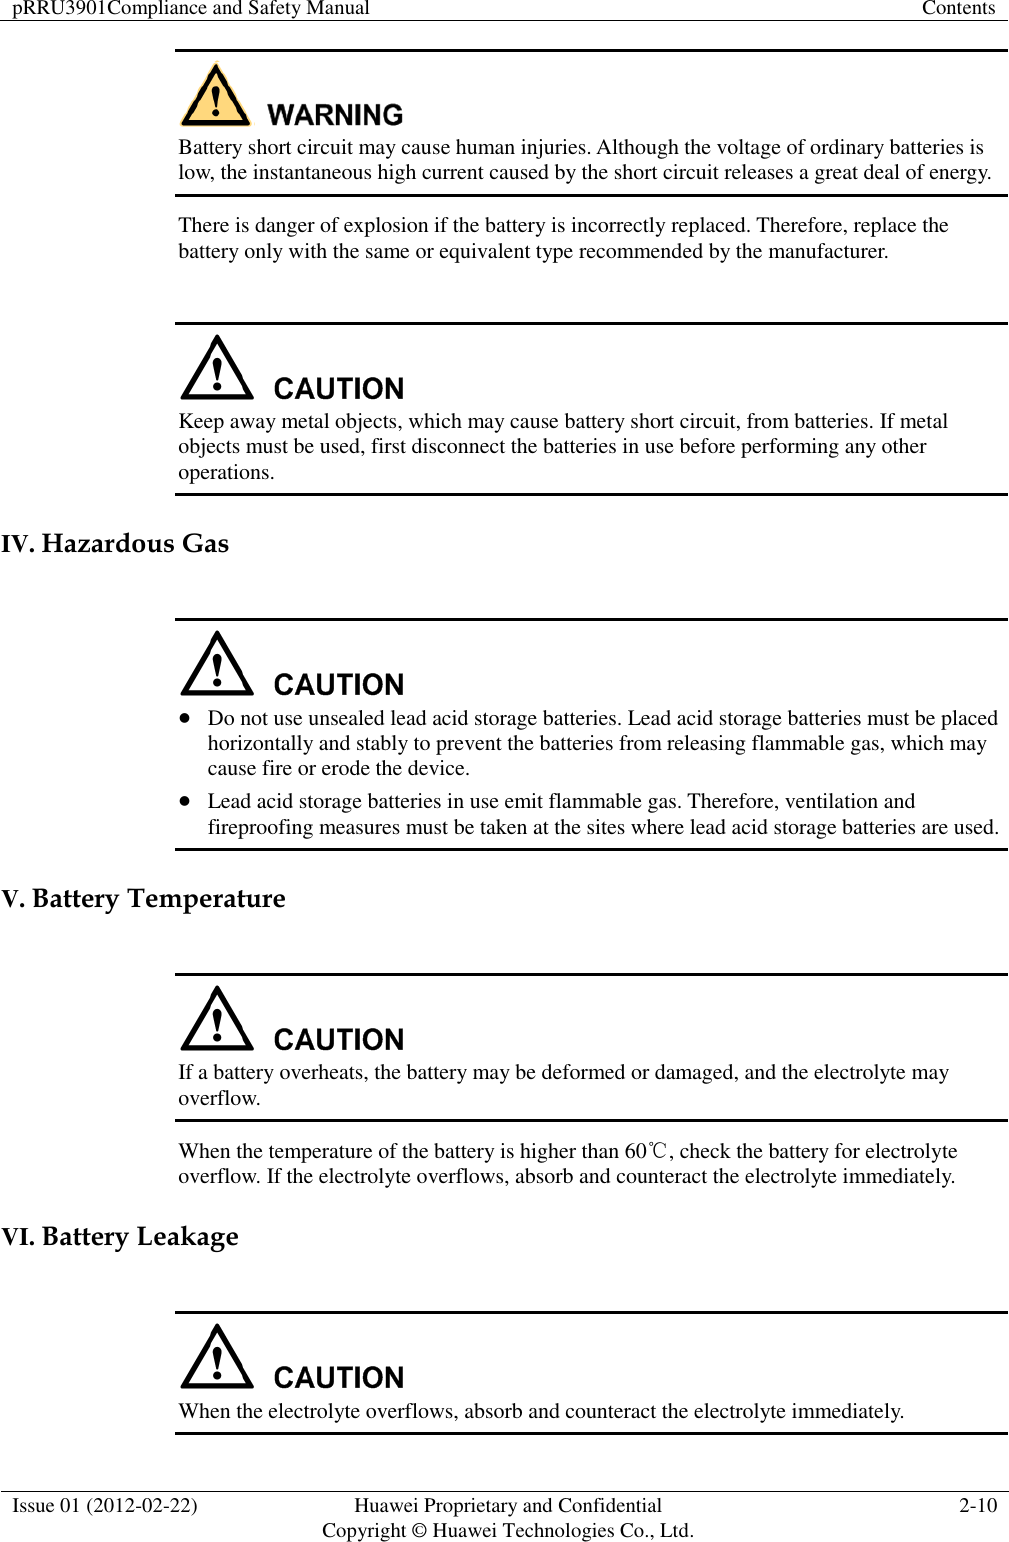 pRRU3901Compliance and Safety Manual Contents  Issue 01 (2012-02-22) Huawei Proprietary and Confidential           Copyright © Huawei Technologies Co., Ltd. 2-10   Battery short circuit may cause human injuries. Although the voltage of ordinary batteries is low, the instantaneous high current caused by the short circuit releases a great deal of energy.   There is danger of explosion if the battery is incorrectly replaced. Therefore, replace the battery only with the same or equivalent type recommended by the manufacturer.   Keep away metal objects, which may cause battery short circuit, from batteries. If metal objects must be used, first disconnect the batteries in use before performing any other operations. IV. Hazardous Gas    Do not use unsealed lead acid storage batteries. Lead acid storage batteries must be placed horizontally and stably to prevent the batteries from releasing flammable gas, which may cause fire or erode the device.  Lead acid storage batteries in use emit flammable gas. Therefore, ventilation and fireproofing measures must be taken at the sites where lead acid storage batteries are used. V. Battery Temperature     If a battery overheats, the battery may be deformed or damaged, and the electrolyte may overflow. When the temperature of the battery is higher than 60℃, check the battery for electrolyte overflow. If the electrolyte overflows, absorb and counteract the electrolyte immediately.   VI. Battery Leakage   When the electrolyte overflows, absorb and counteract the electrolyte immediately. 